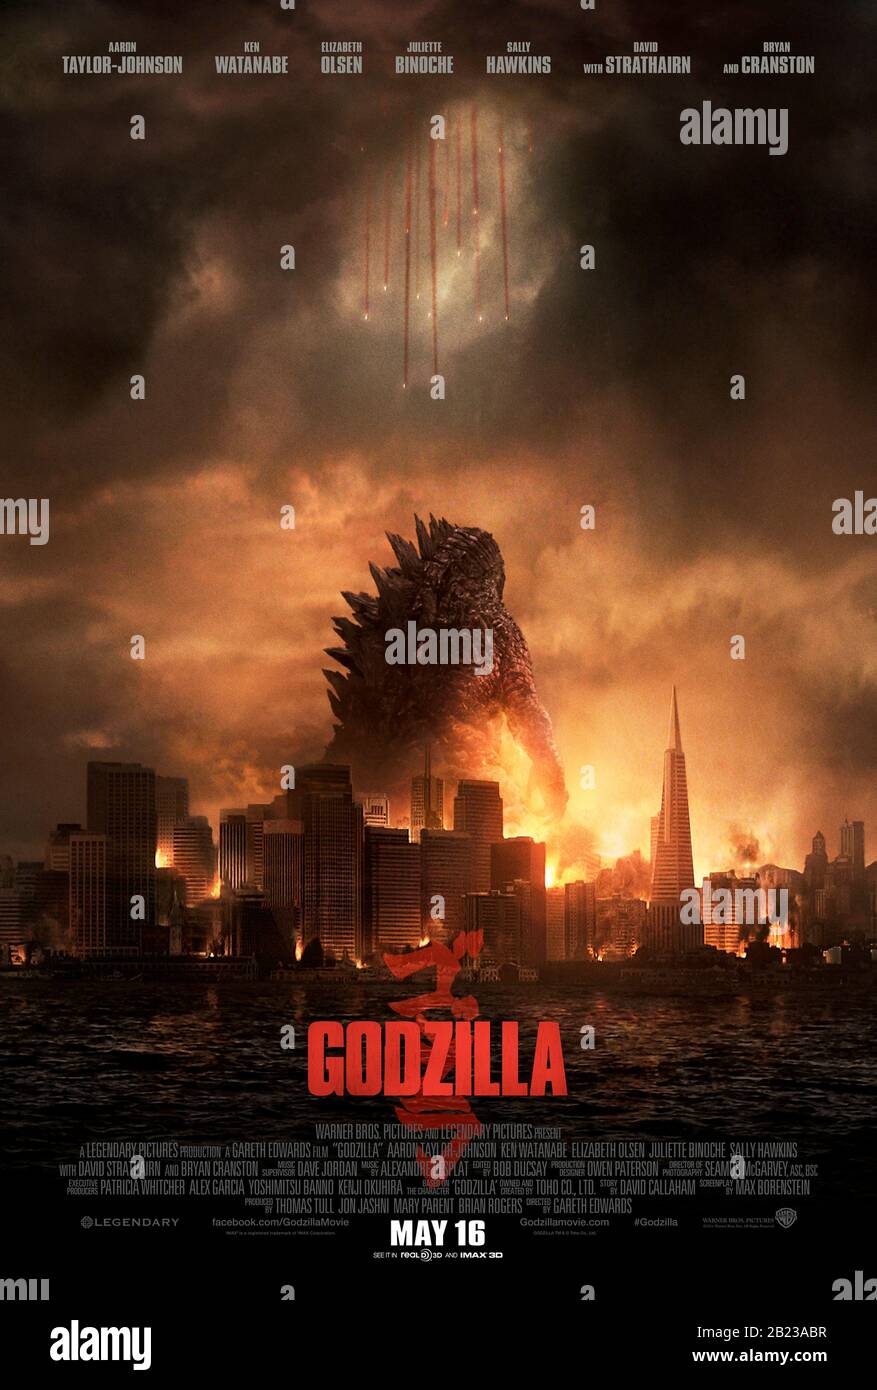 Godzilla (2014) directed by Gareth Edwards and starring Aaron Taylor-Johnson, Elizabeth Olsen, Bryan Cranston and Juliette Binoche. American reboot of Toho's Godzilla franchise and the first instalment of Legendary's MonsterVerse. Can Gozilla take on MUTO and secure his place as King of the Monsters? Stock Photo